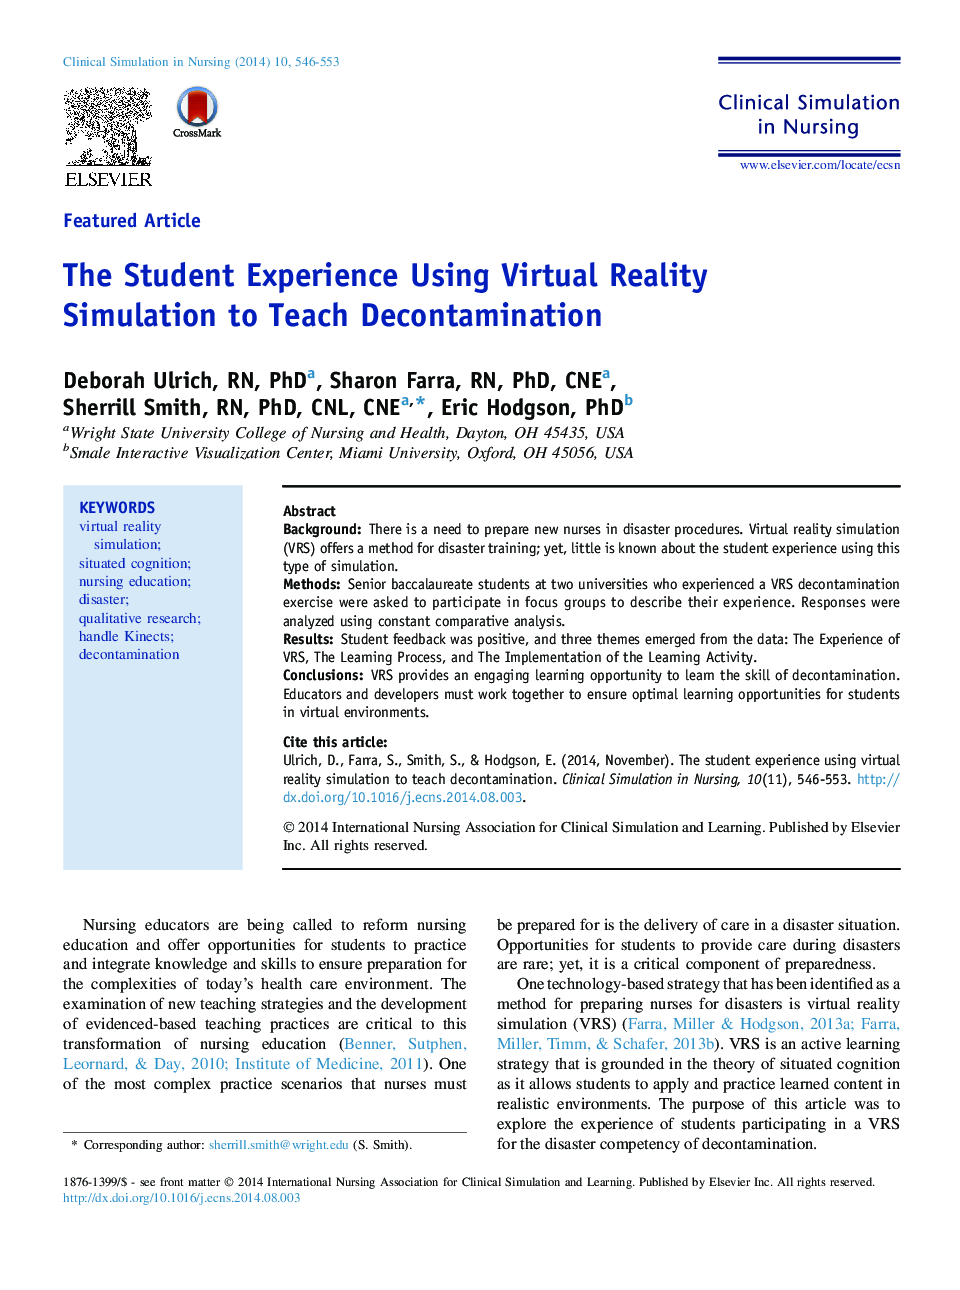 The Student Experience Using Virtual Reality Simulation to Teach Decontamination